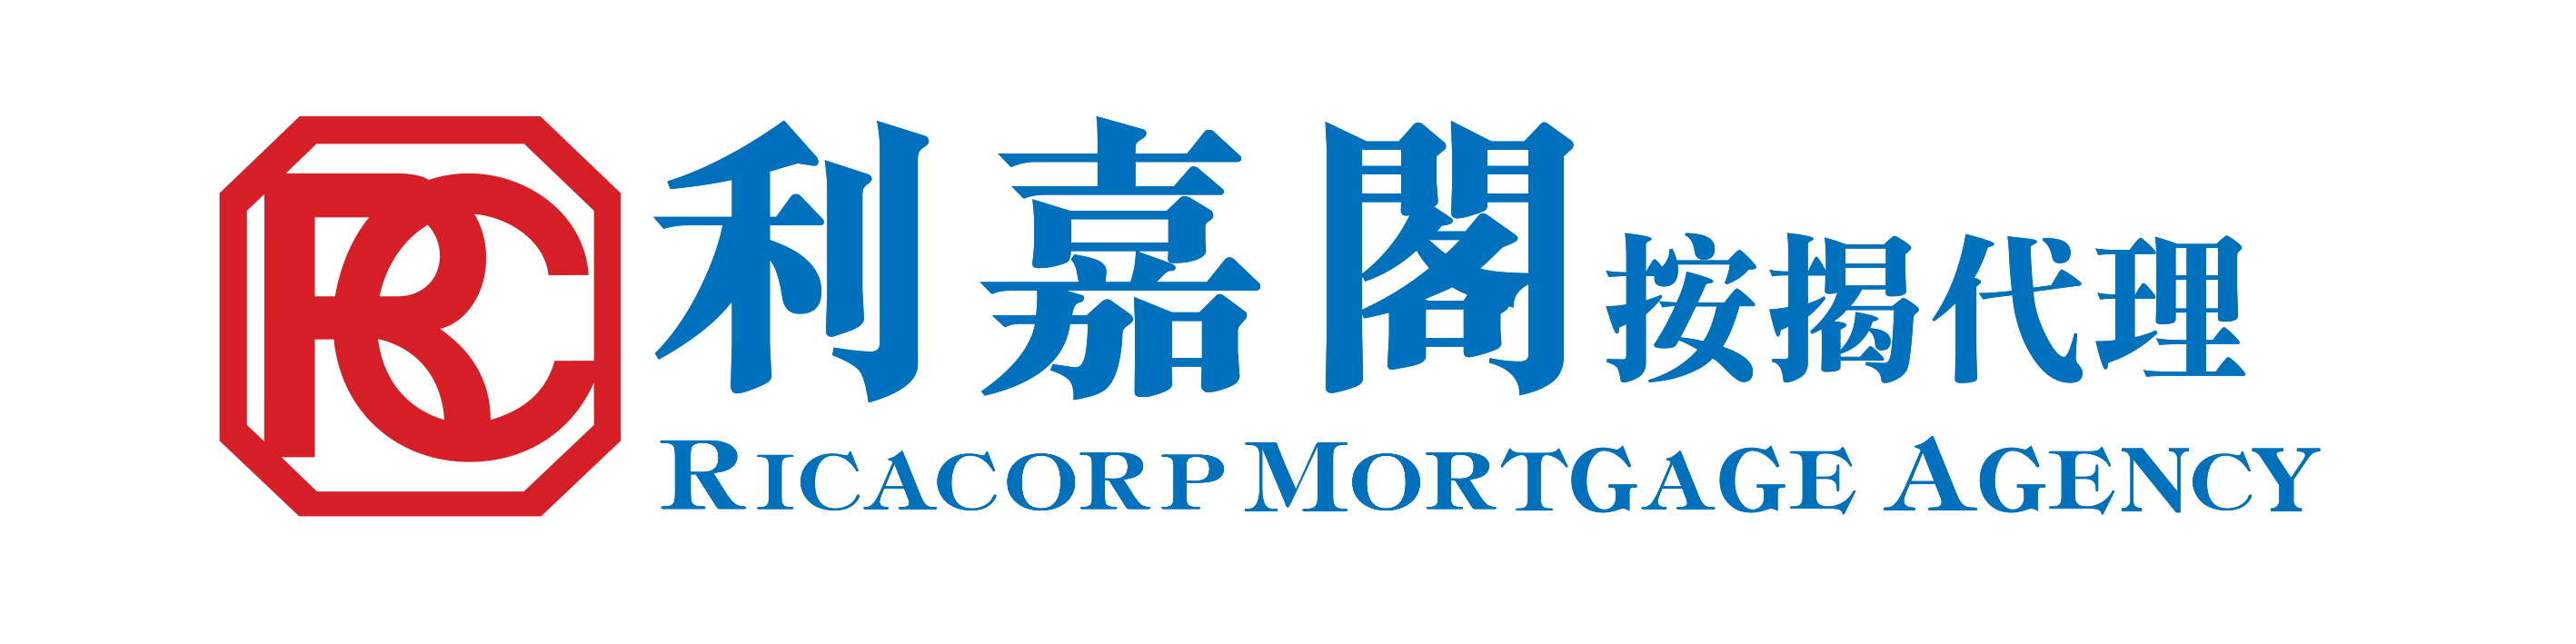 Ricacorp Mortgage Agency